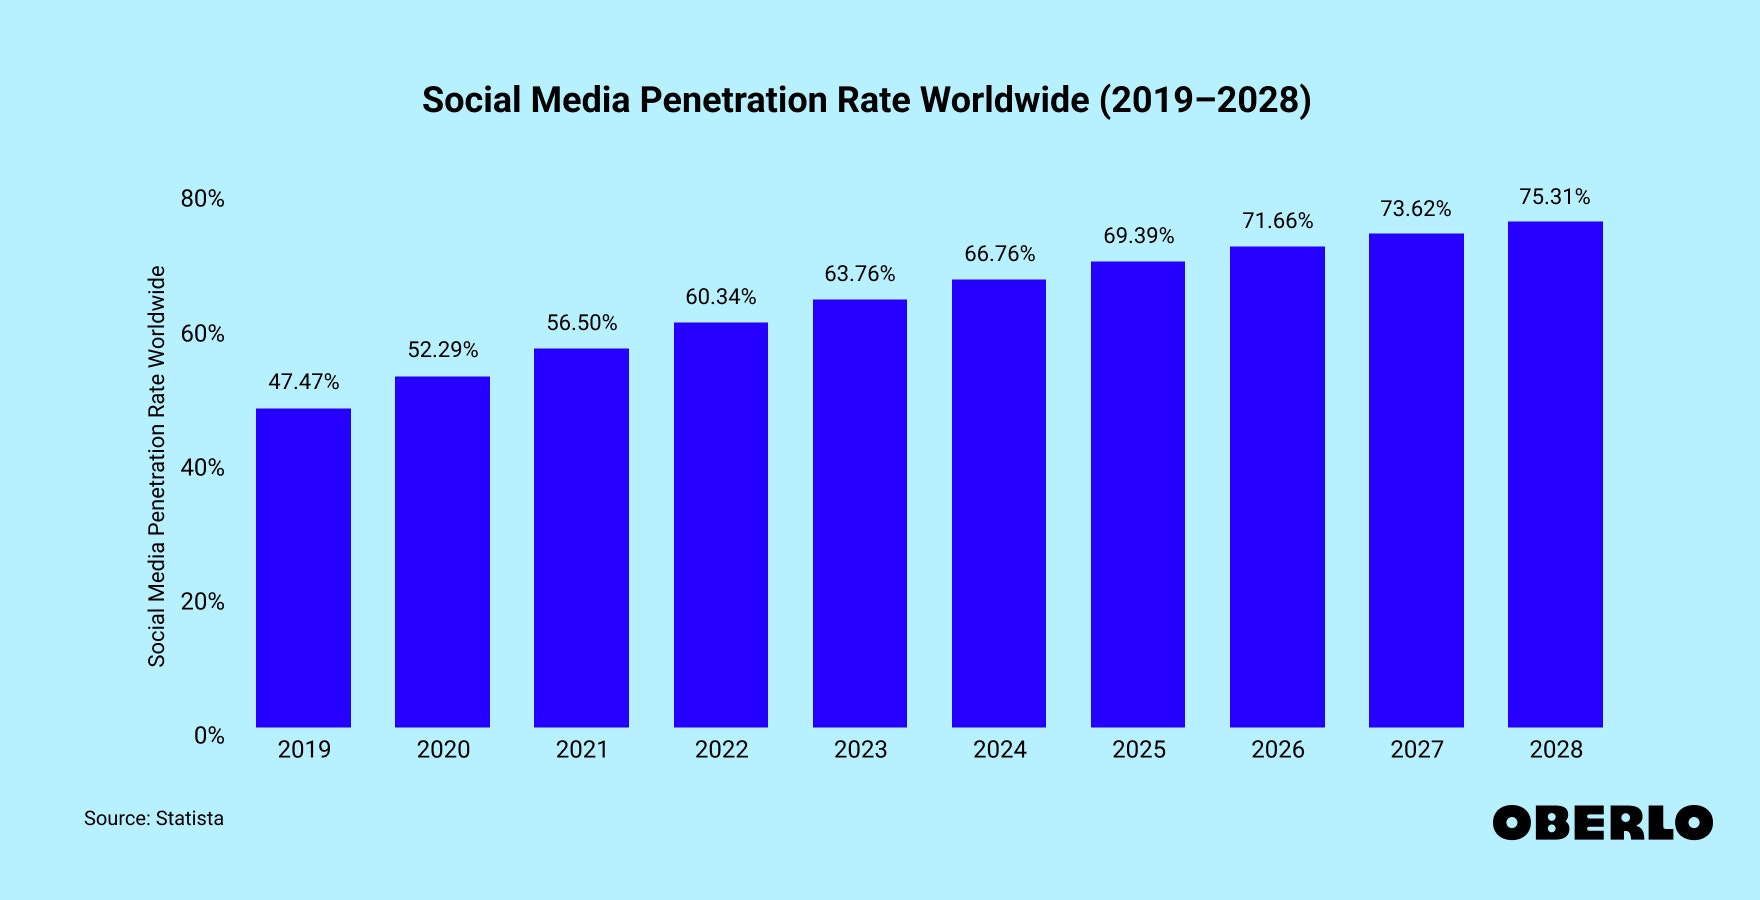 Chart showing the social media penetration rate worldwide